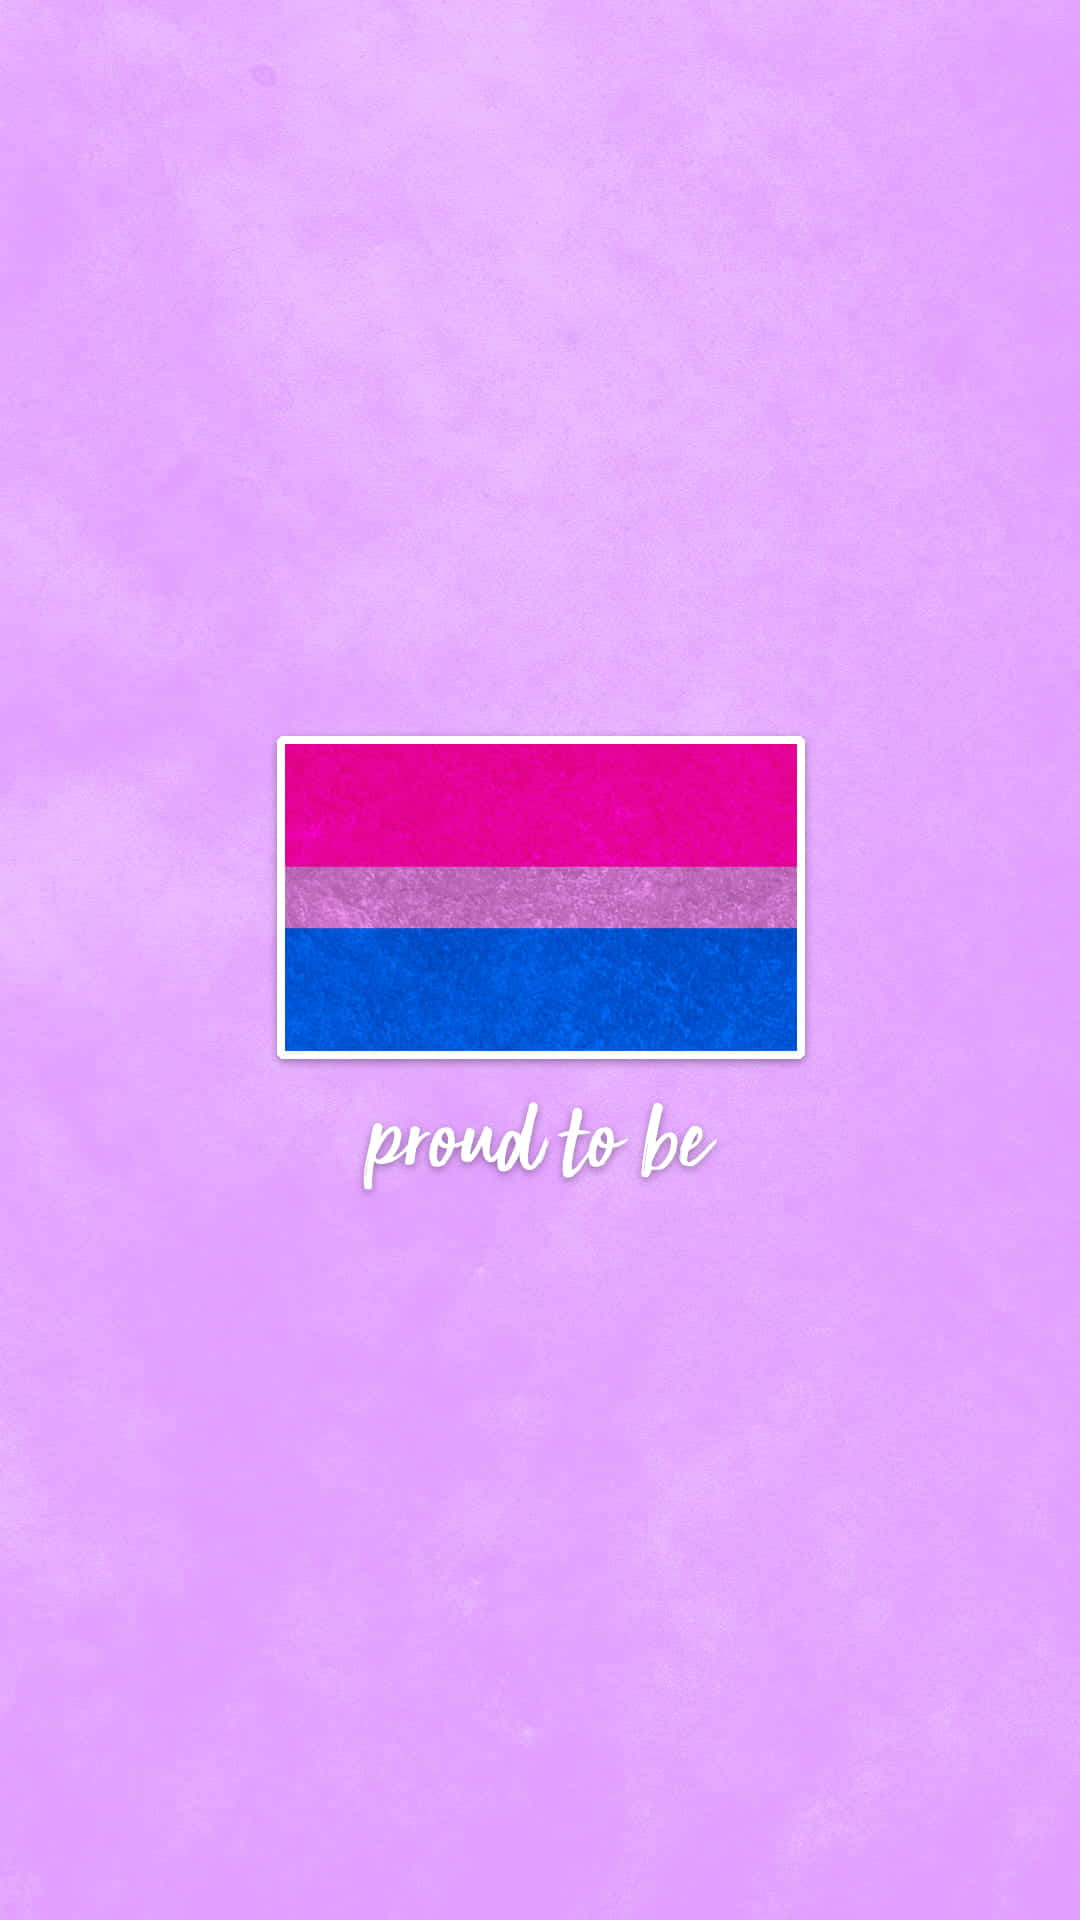 Proud To Be Sticker Wallpaper